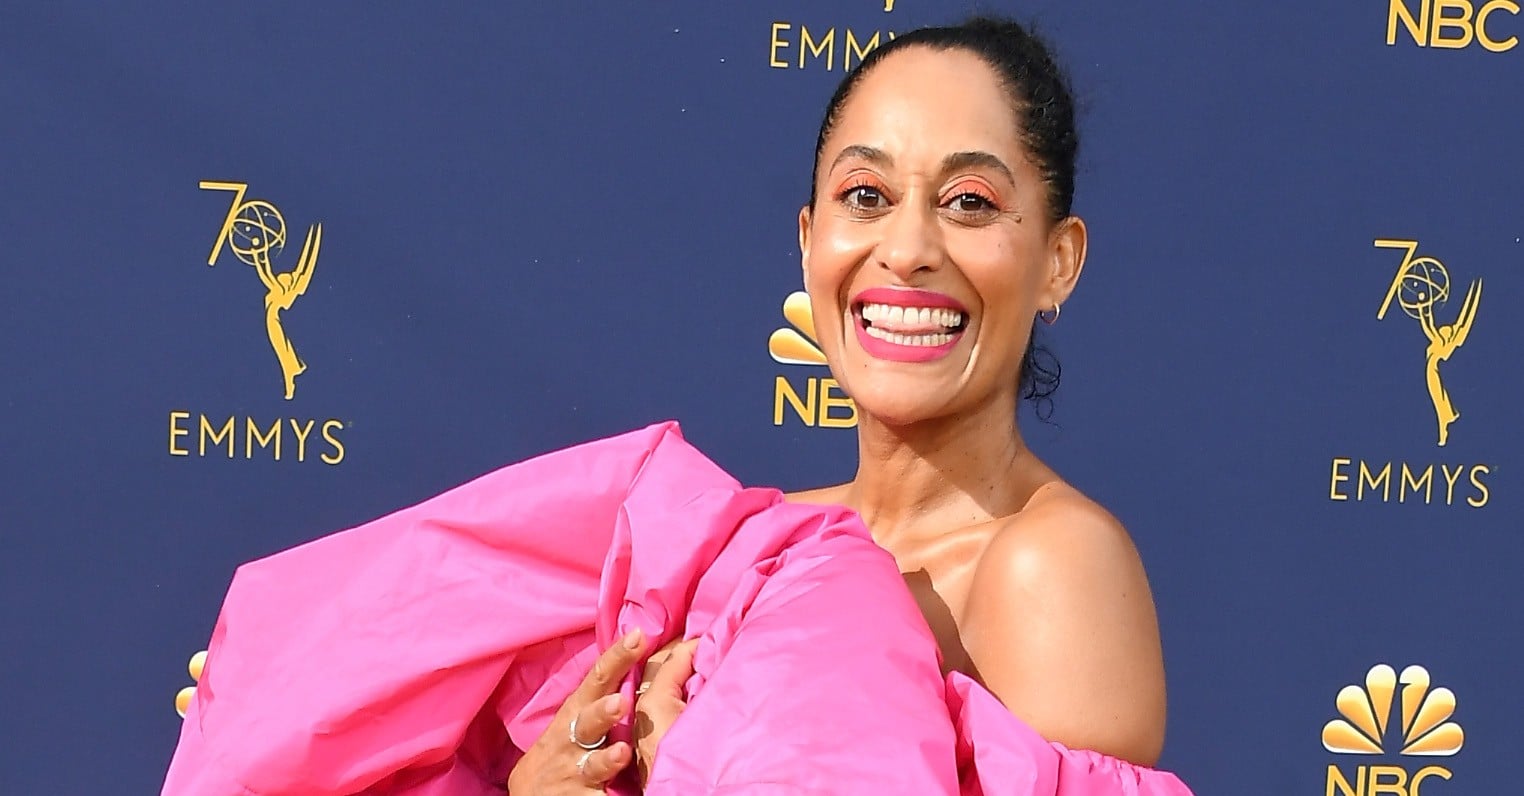 Tracee Ellis Ross Quotes About Being Single Oct. 2018 | POPSUGAR Celebrity